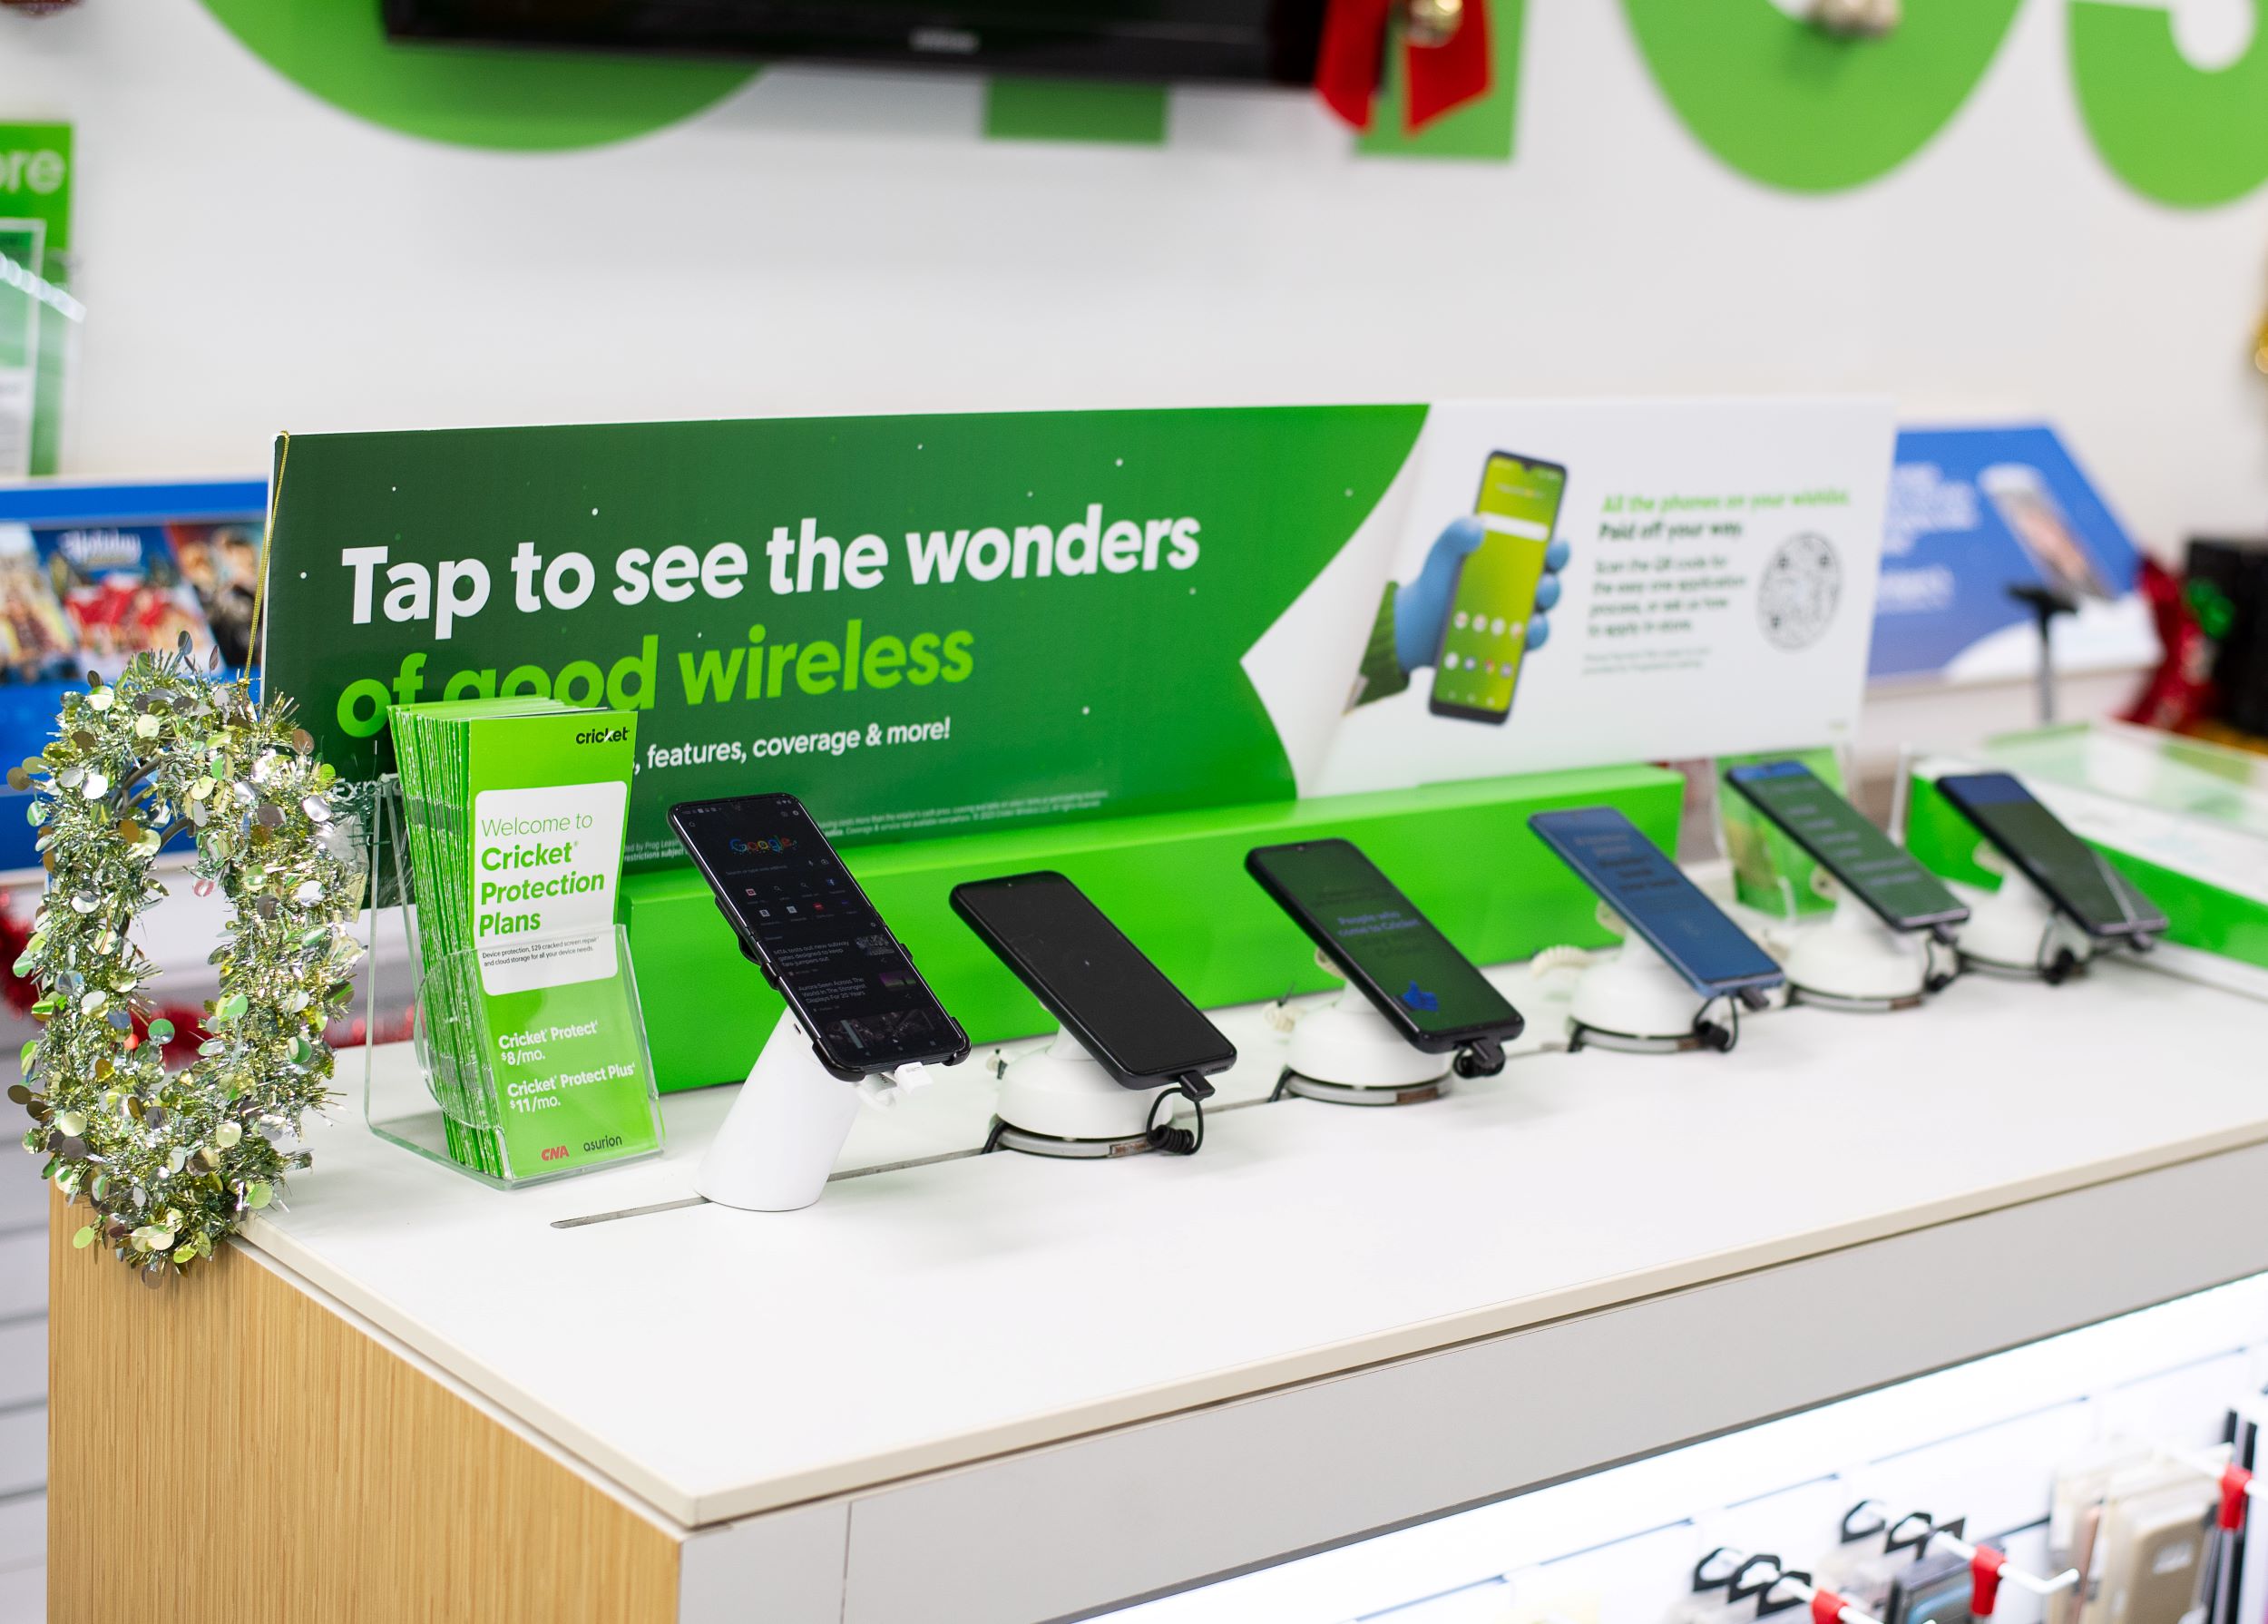 A display of smartphones aligned on a kiosk in a store with promotional signs for cricket wireless, adorned with a small holiday wreath on the side.